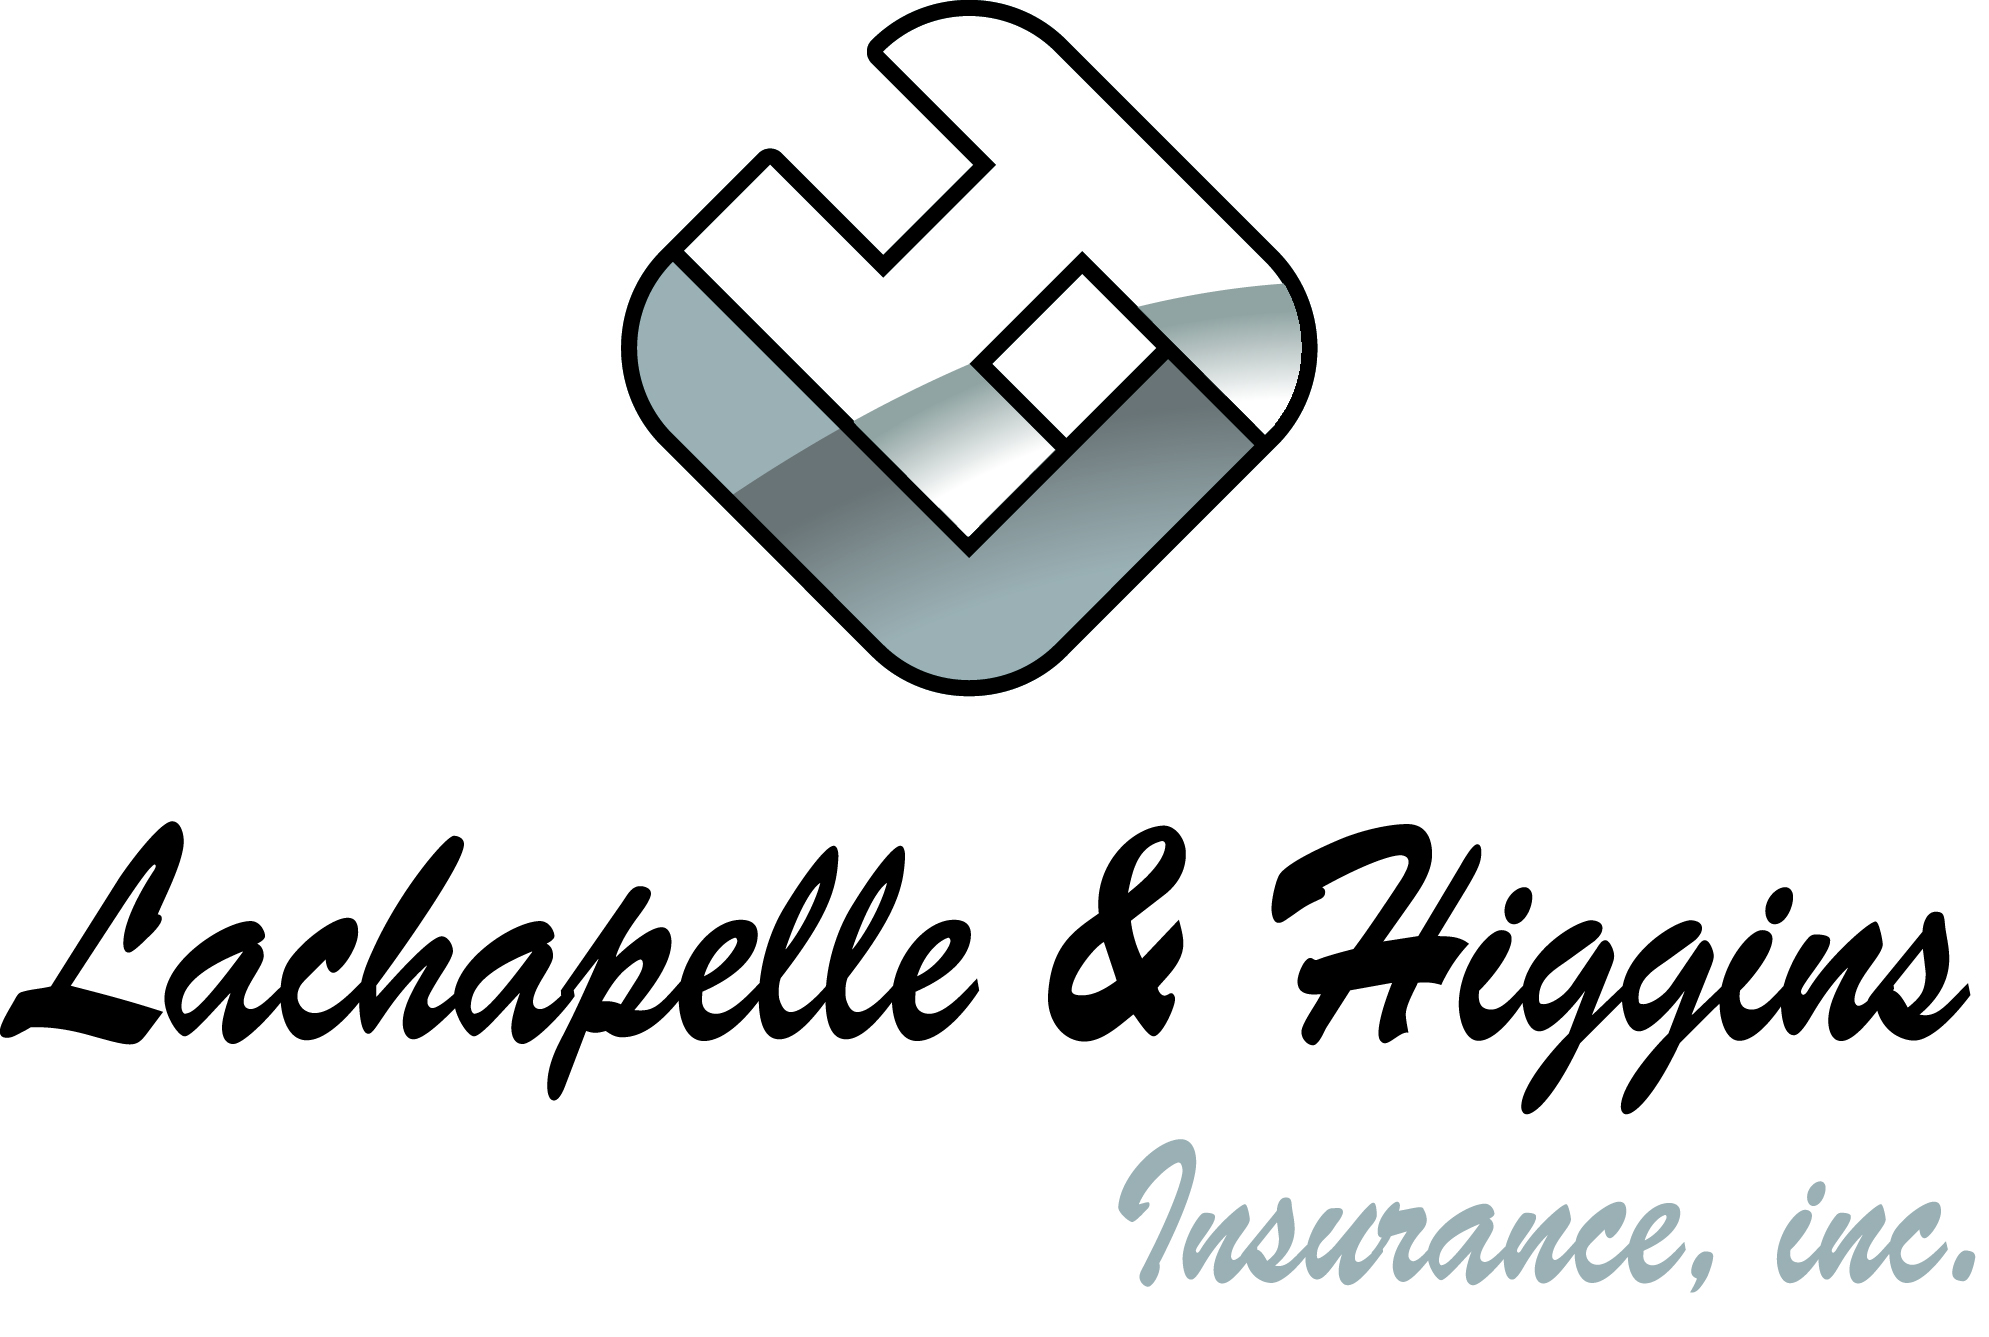 Lachapelle and Higgins Insurance, Inc